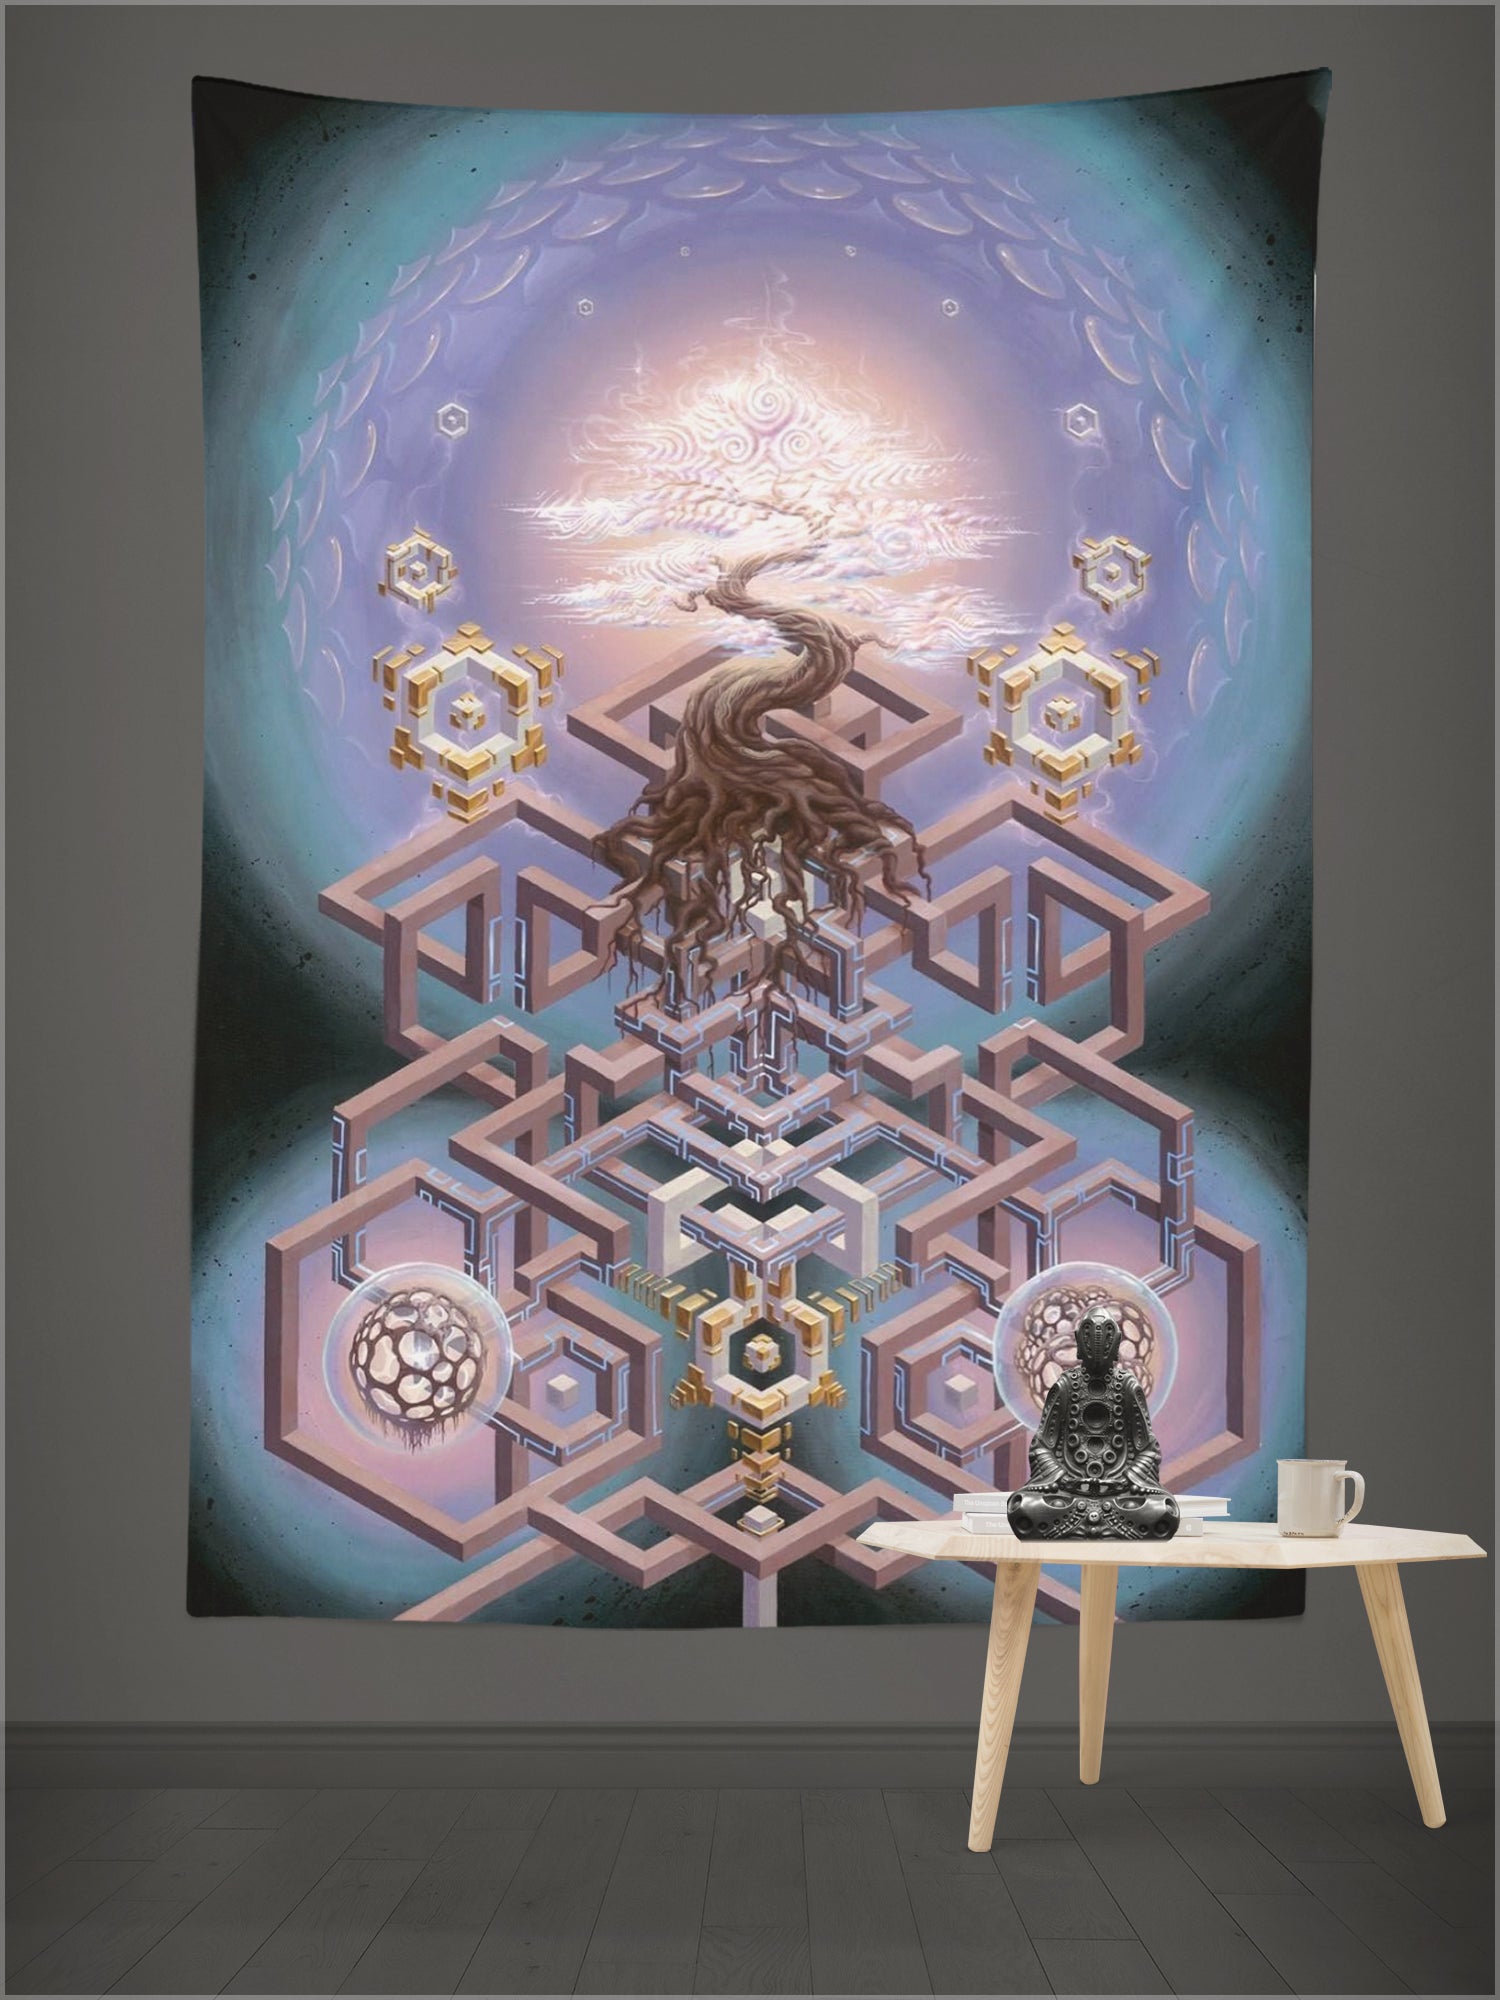 Triforma Tapestry by Blake Foster and DRMWVR - SHIPS MARCH 2022